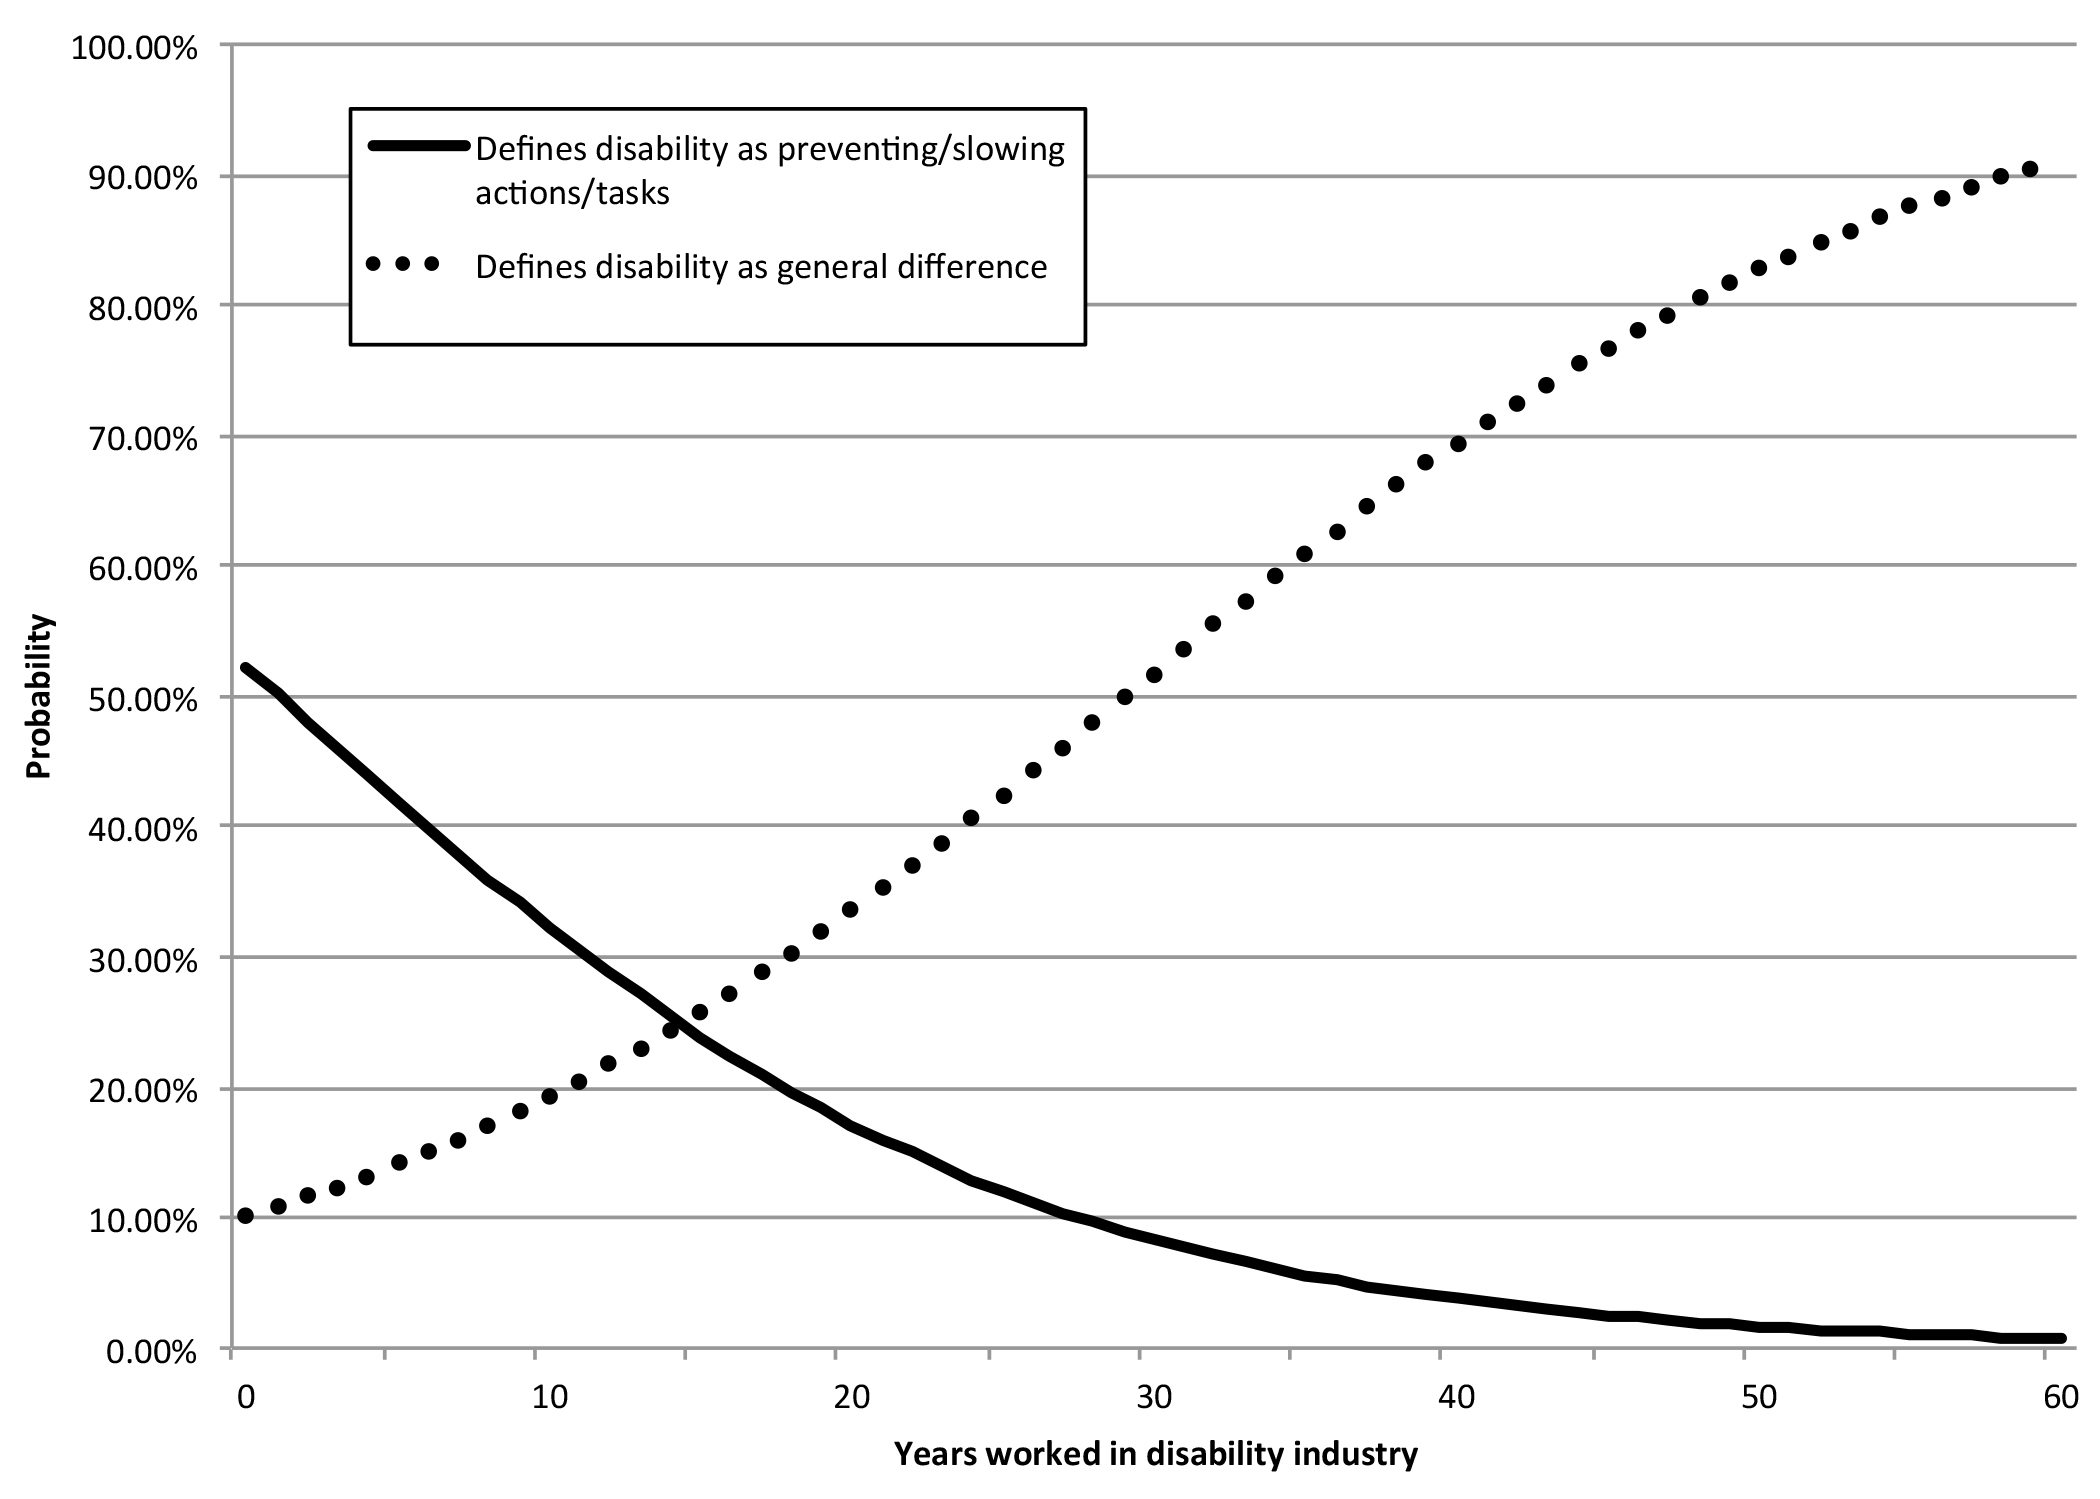 Figure of a graph representing the probability of how an individual defines disability according to univariate statistics. The x-axis is Years worked in disability industry and ranges from 0 to 60 with an interval of 5. The y-axis is probability in percentage and ranges from 0 to 100 with an internal of 10. There are two curved lines. The solid line represents defines disability as preventing / slowing actions / tasks. The dotted line represents defines disability as general difference. The graphs starts with the dotted line at the 10% mark and the solid line at just above the 50% mark. The lines shift so that the solid line decreases and the dotted line increases. The lines cross at approxiamtely the 25%, 15 year mark. The solid line ends at close to 0% when at 60 years and the dotted line is above 90% when at 60 years.